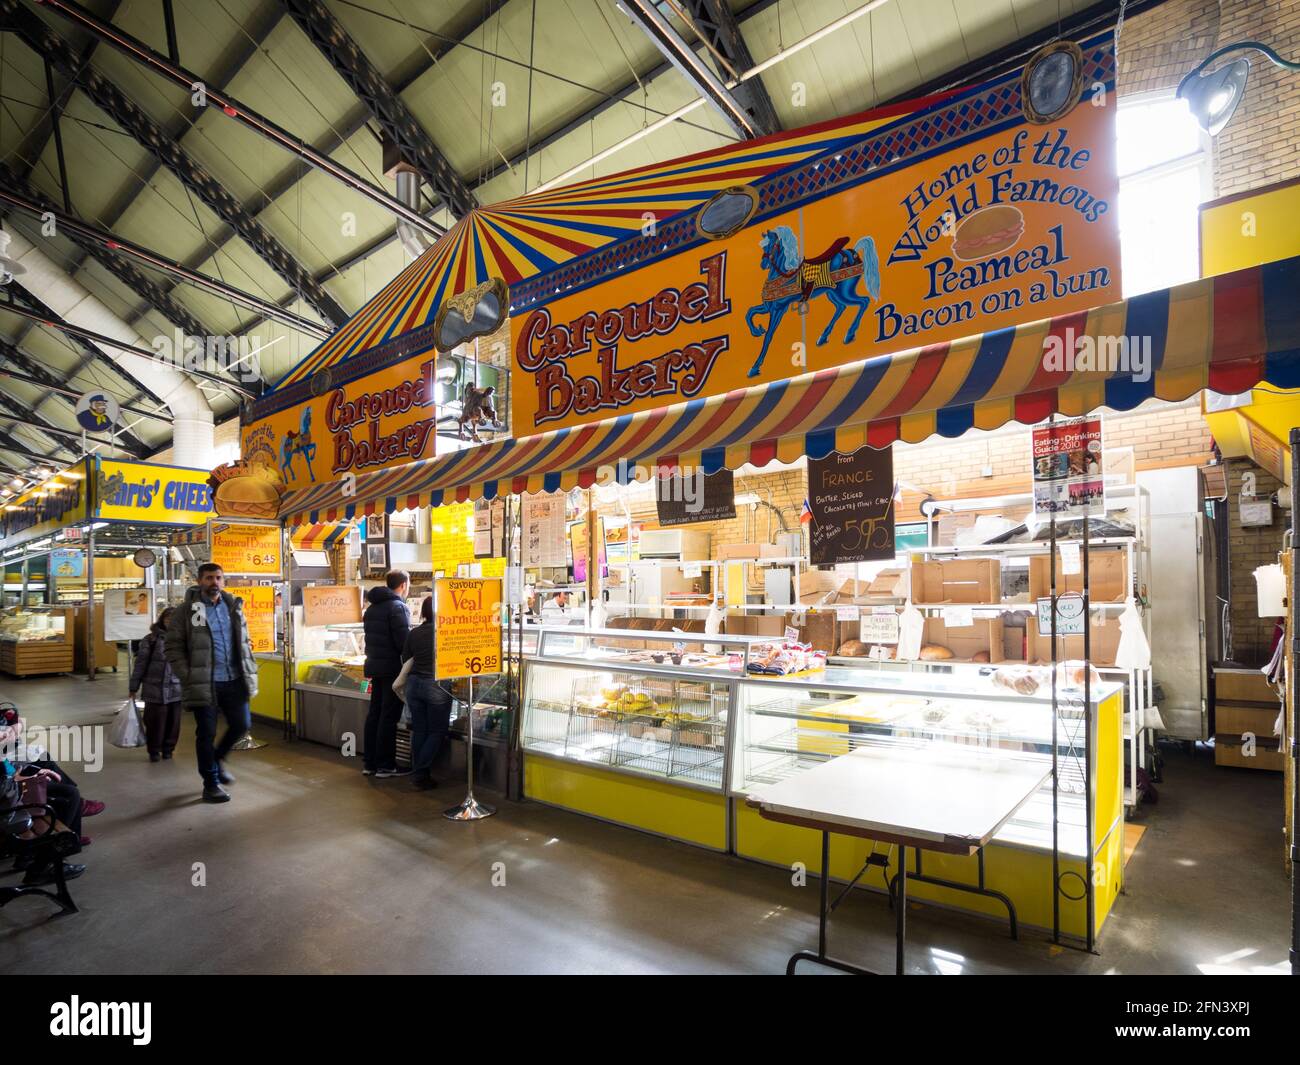 The Carousel Bakery, home of the world-famous peameal bacon sandwich, at the St. Lawrence Market in Toronto, Ontario, Canada. Stock Photo